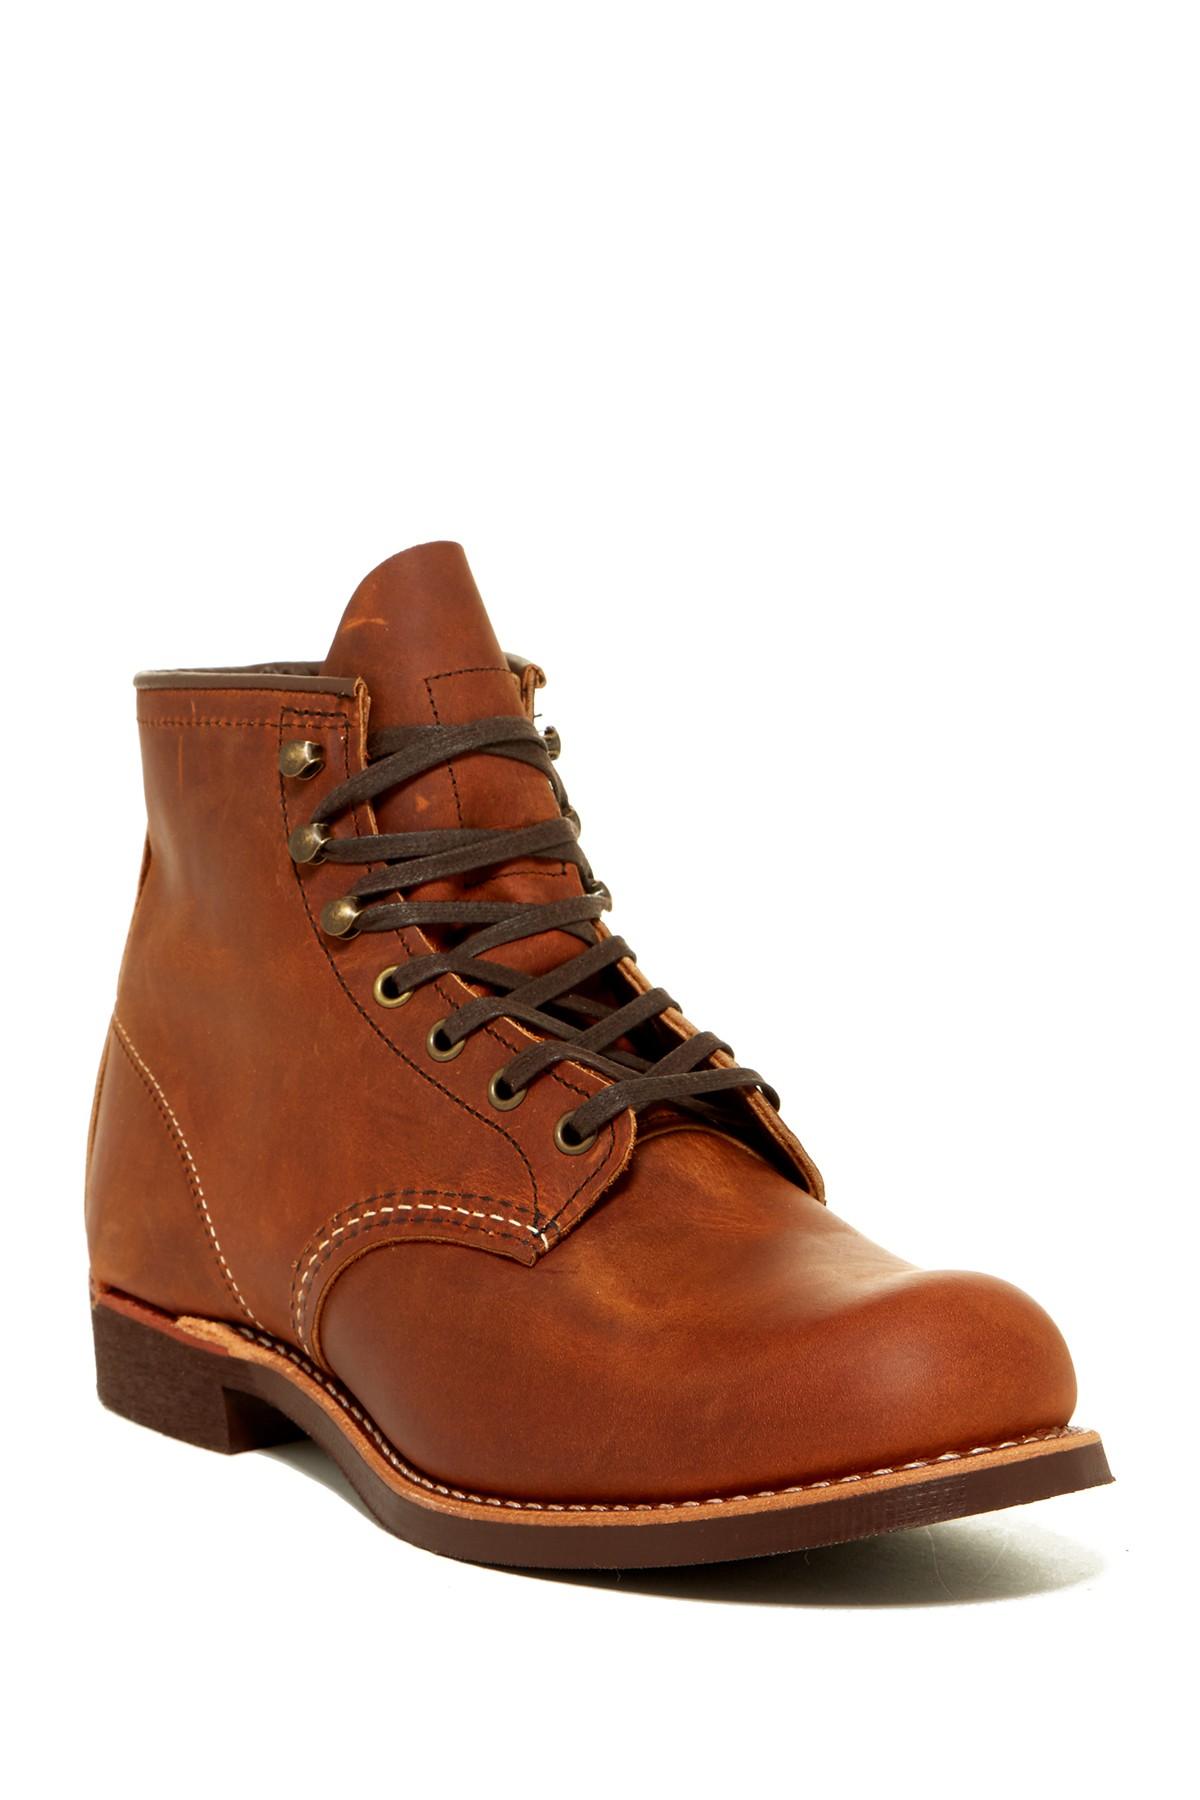 Red Wing Blacksmith Leather Boot - Factory Second - Wide Width 